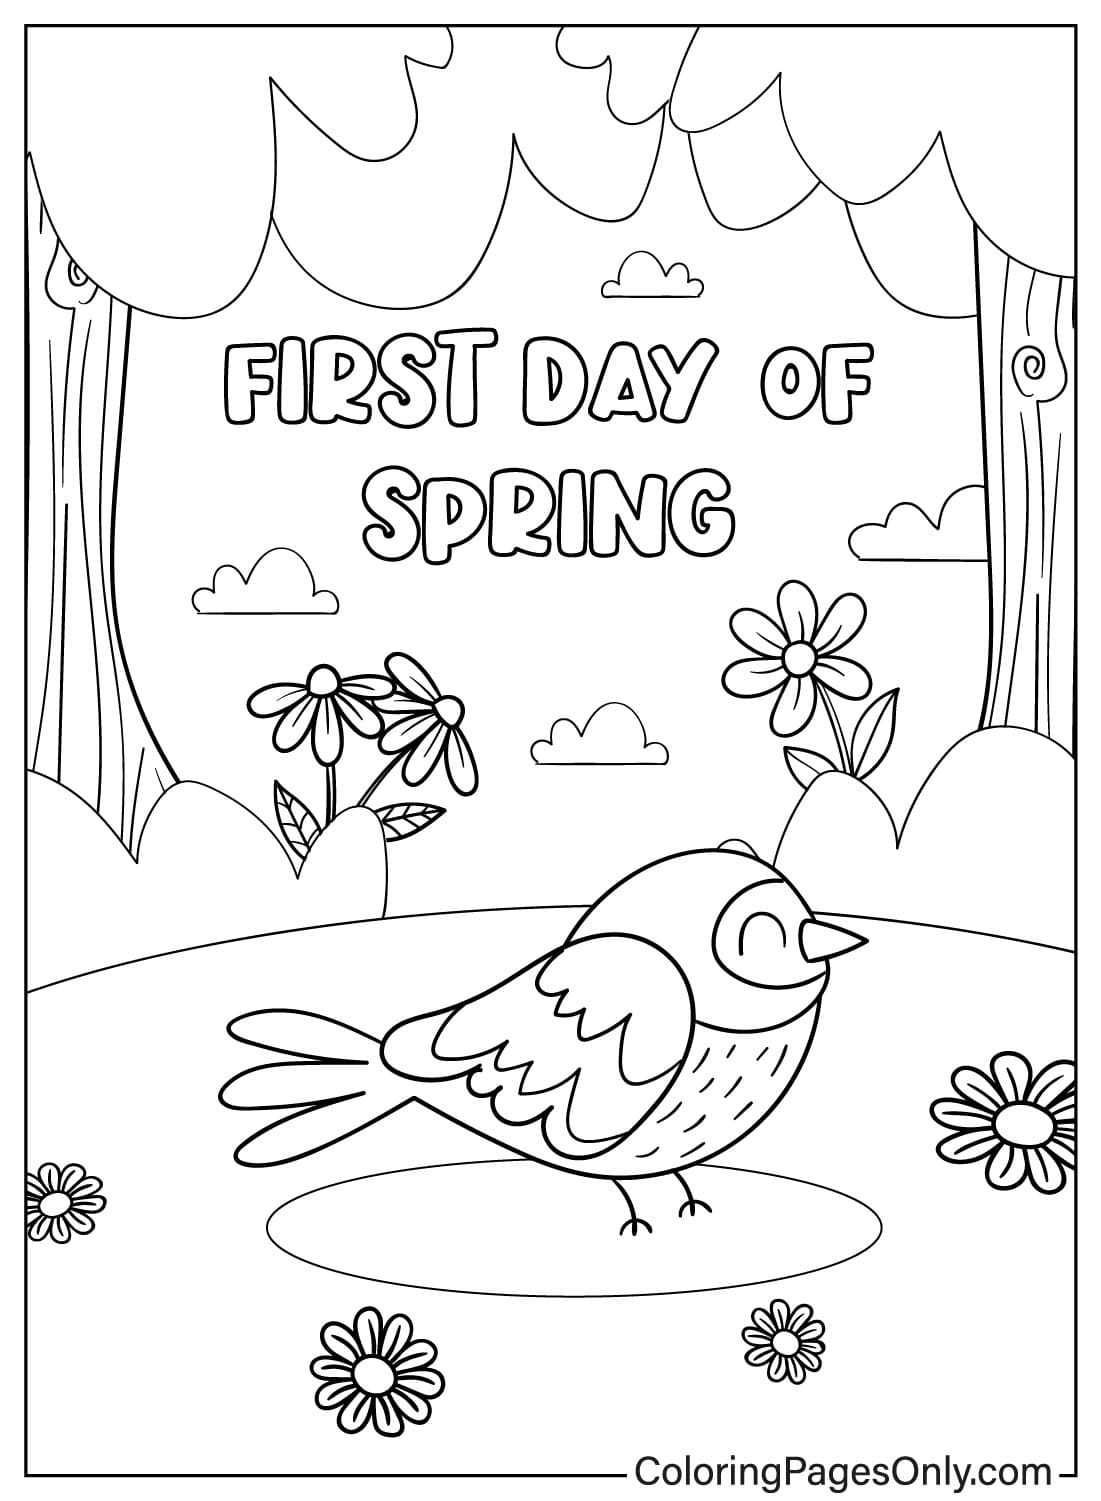 First Day of Spring Coloring Page from First Day of Spring